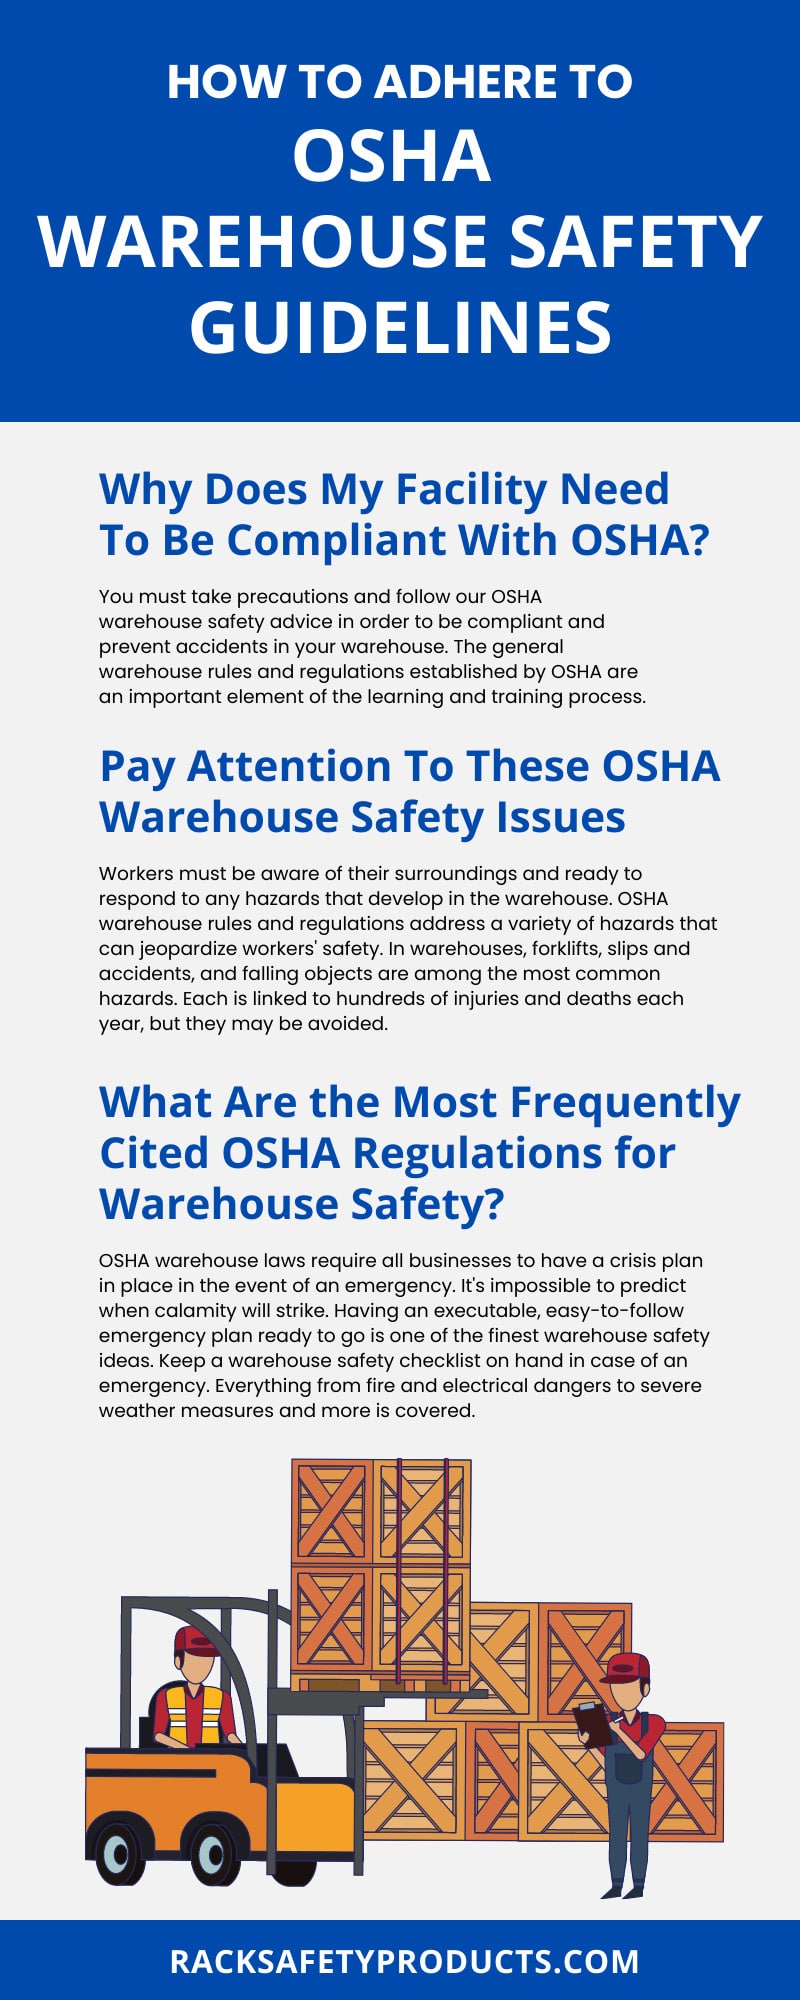 How To Adhere To OSHA Warehouse Safety Guidelines